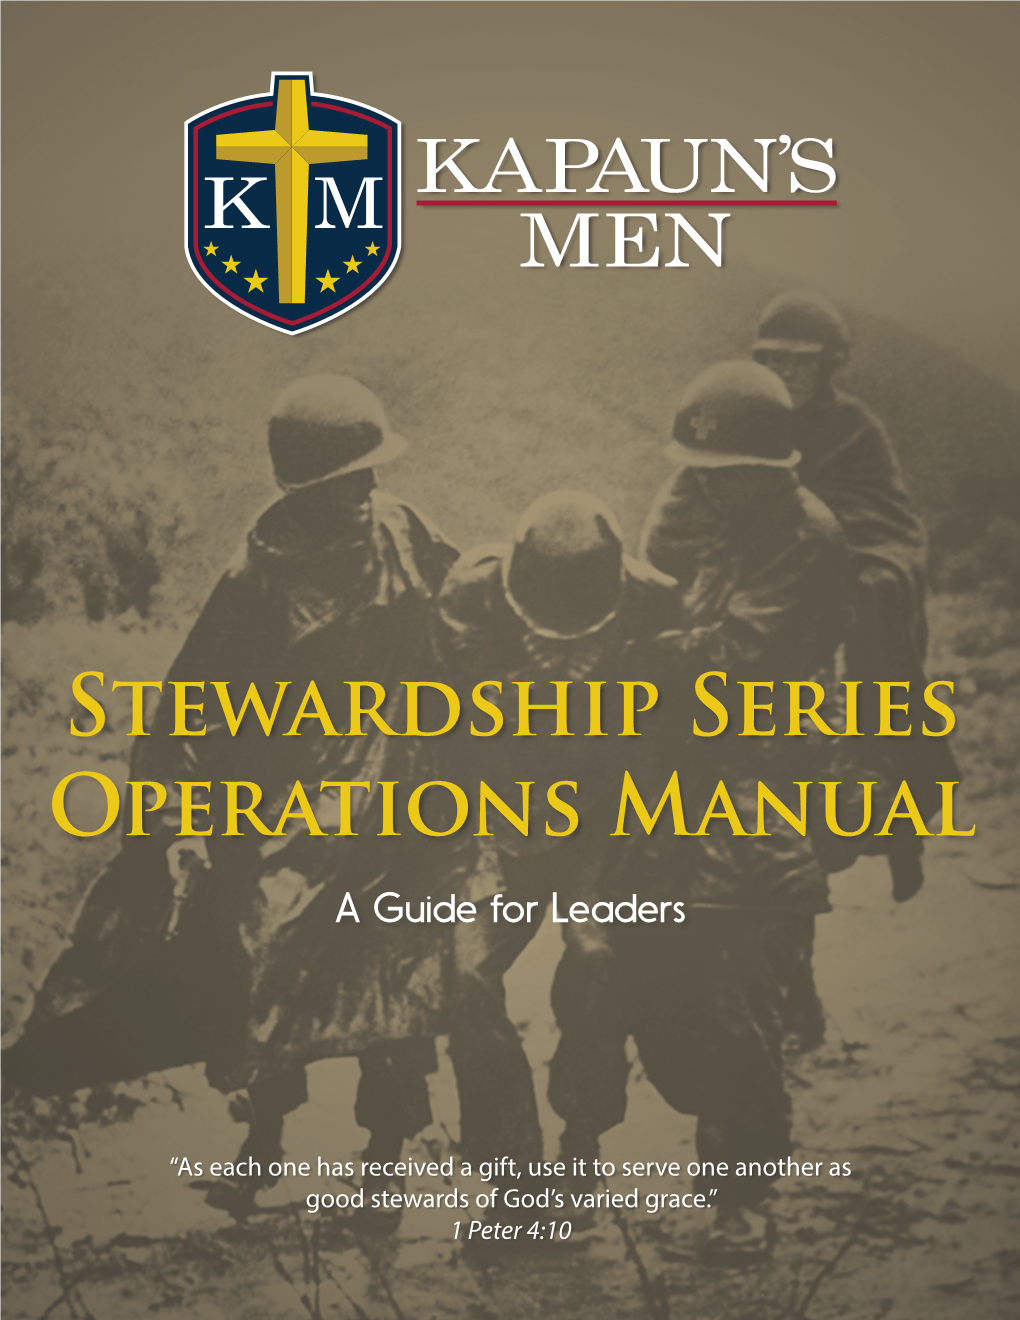 Stewardship Series Operations Manual a Guide for Leaders